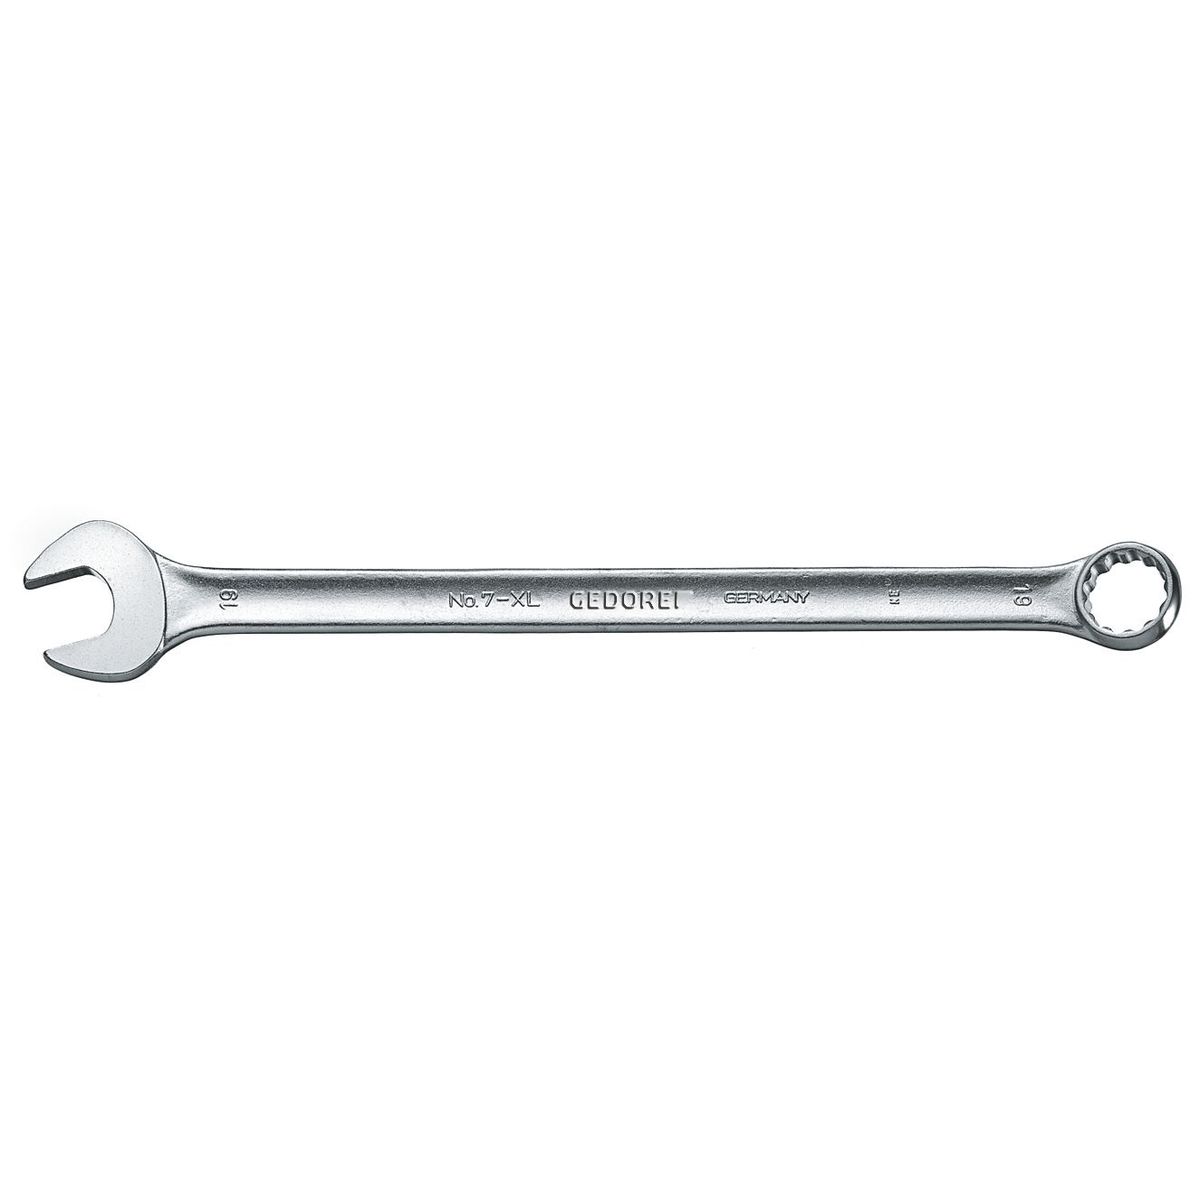 Combination spanner, extra long 11mm No.7 XL 11 Gedore